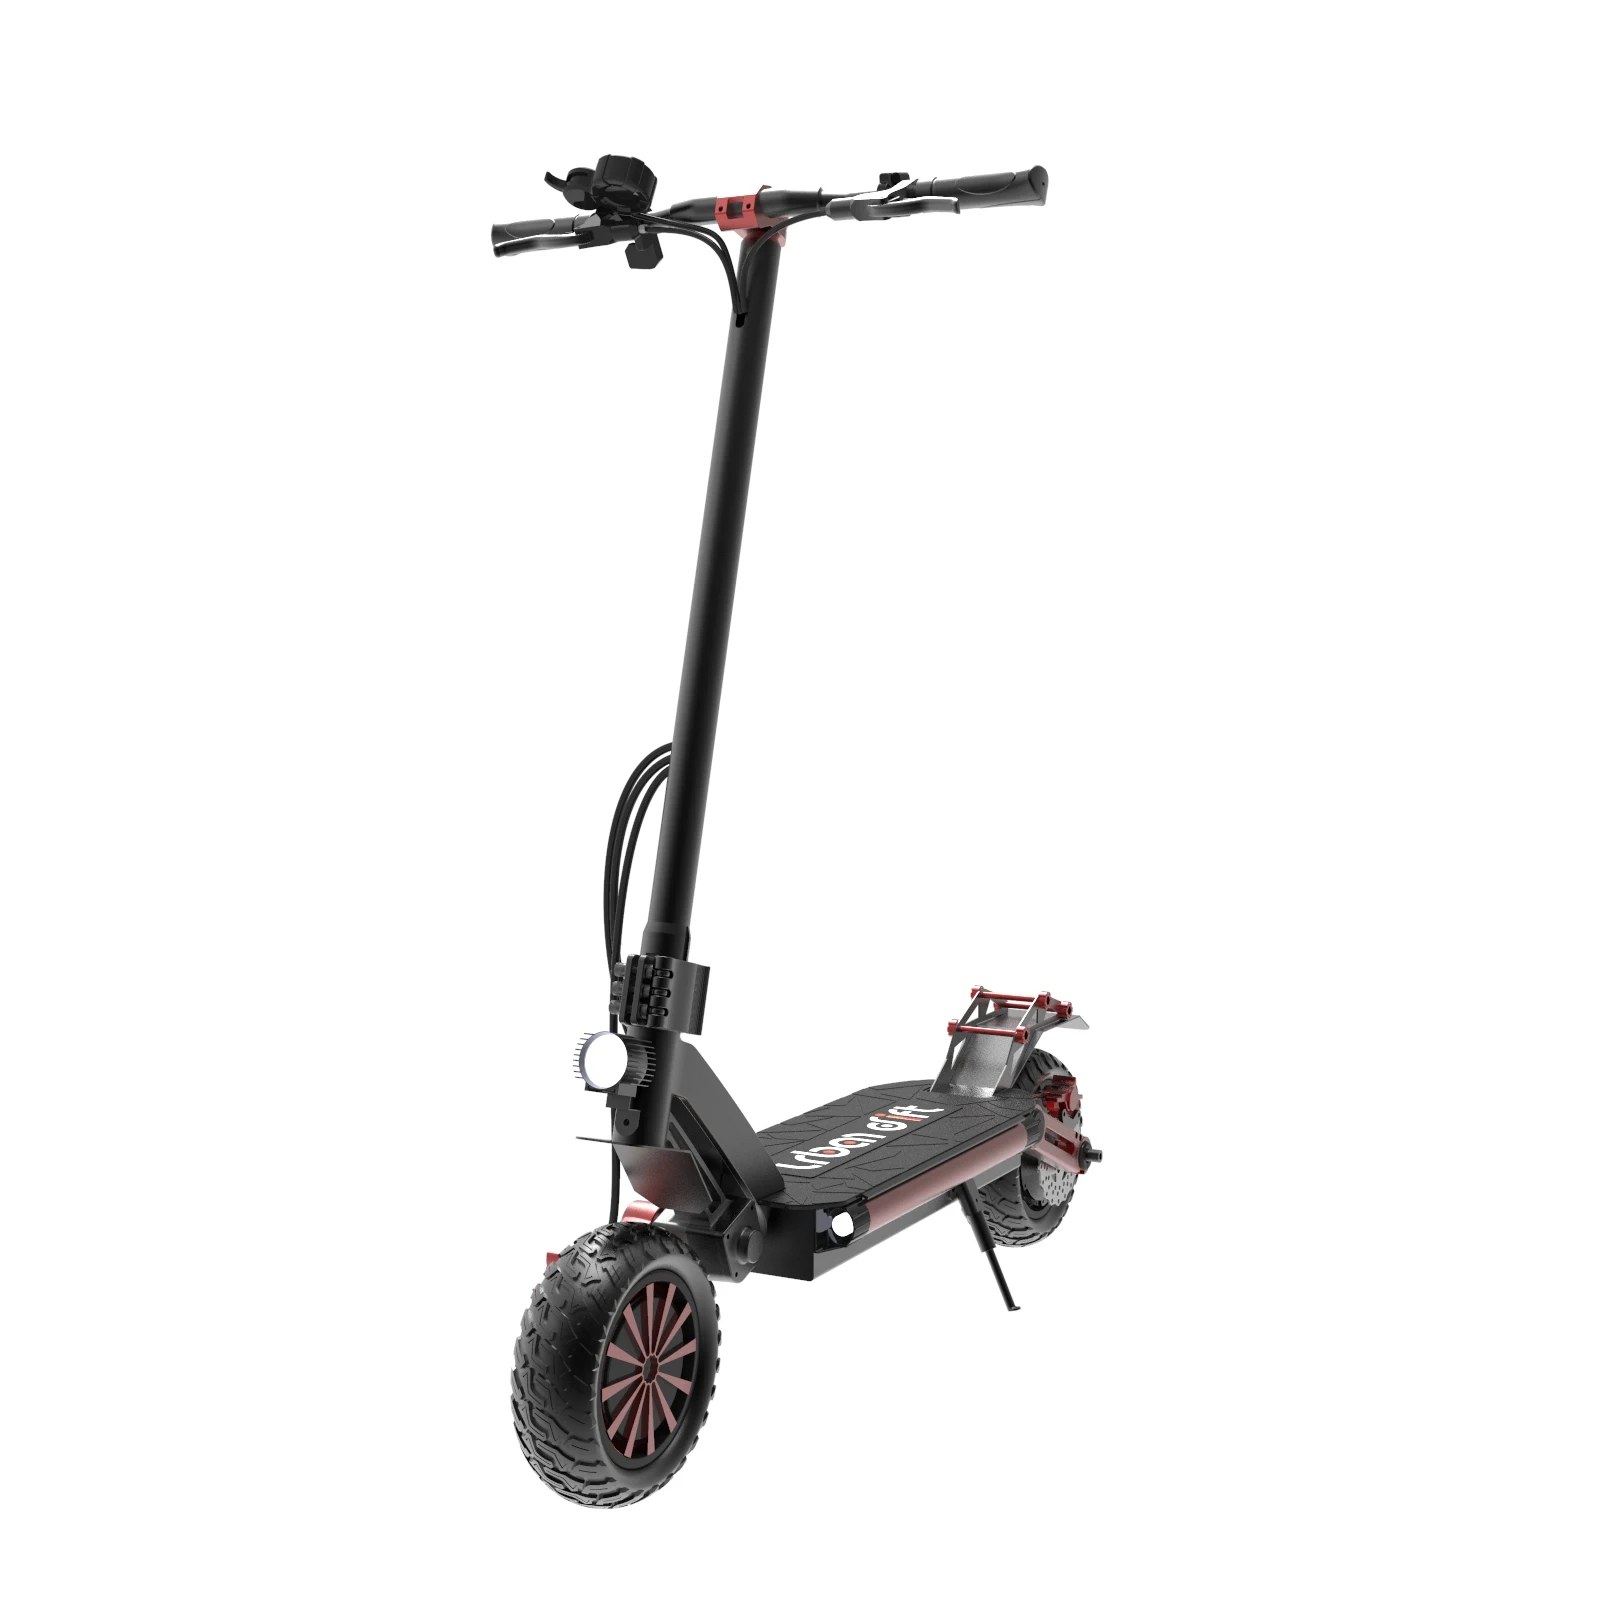 

E Scooter EEC COC USA European Warehouse Stock E-scooter 1600W Fat Tire Citycoco Scooter Electrico Long Range for Adults 2021